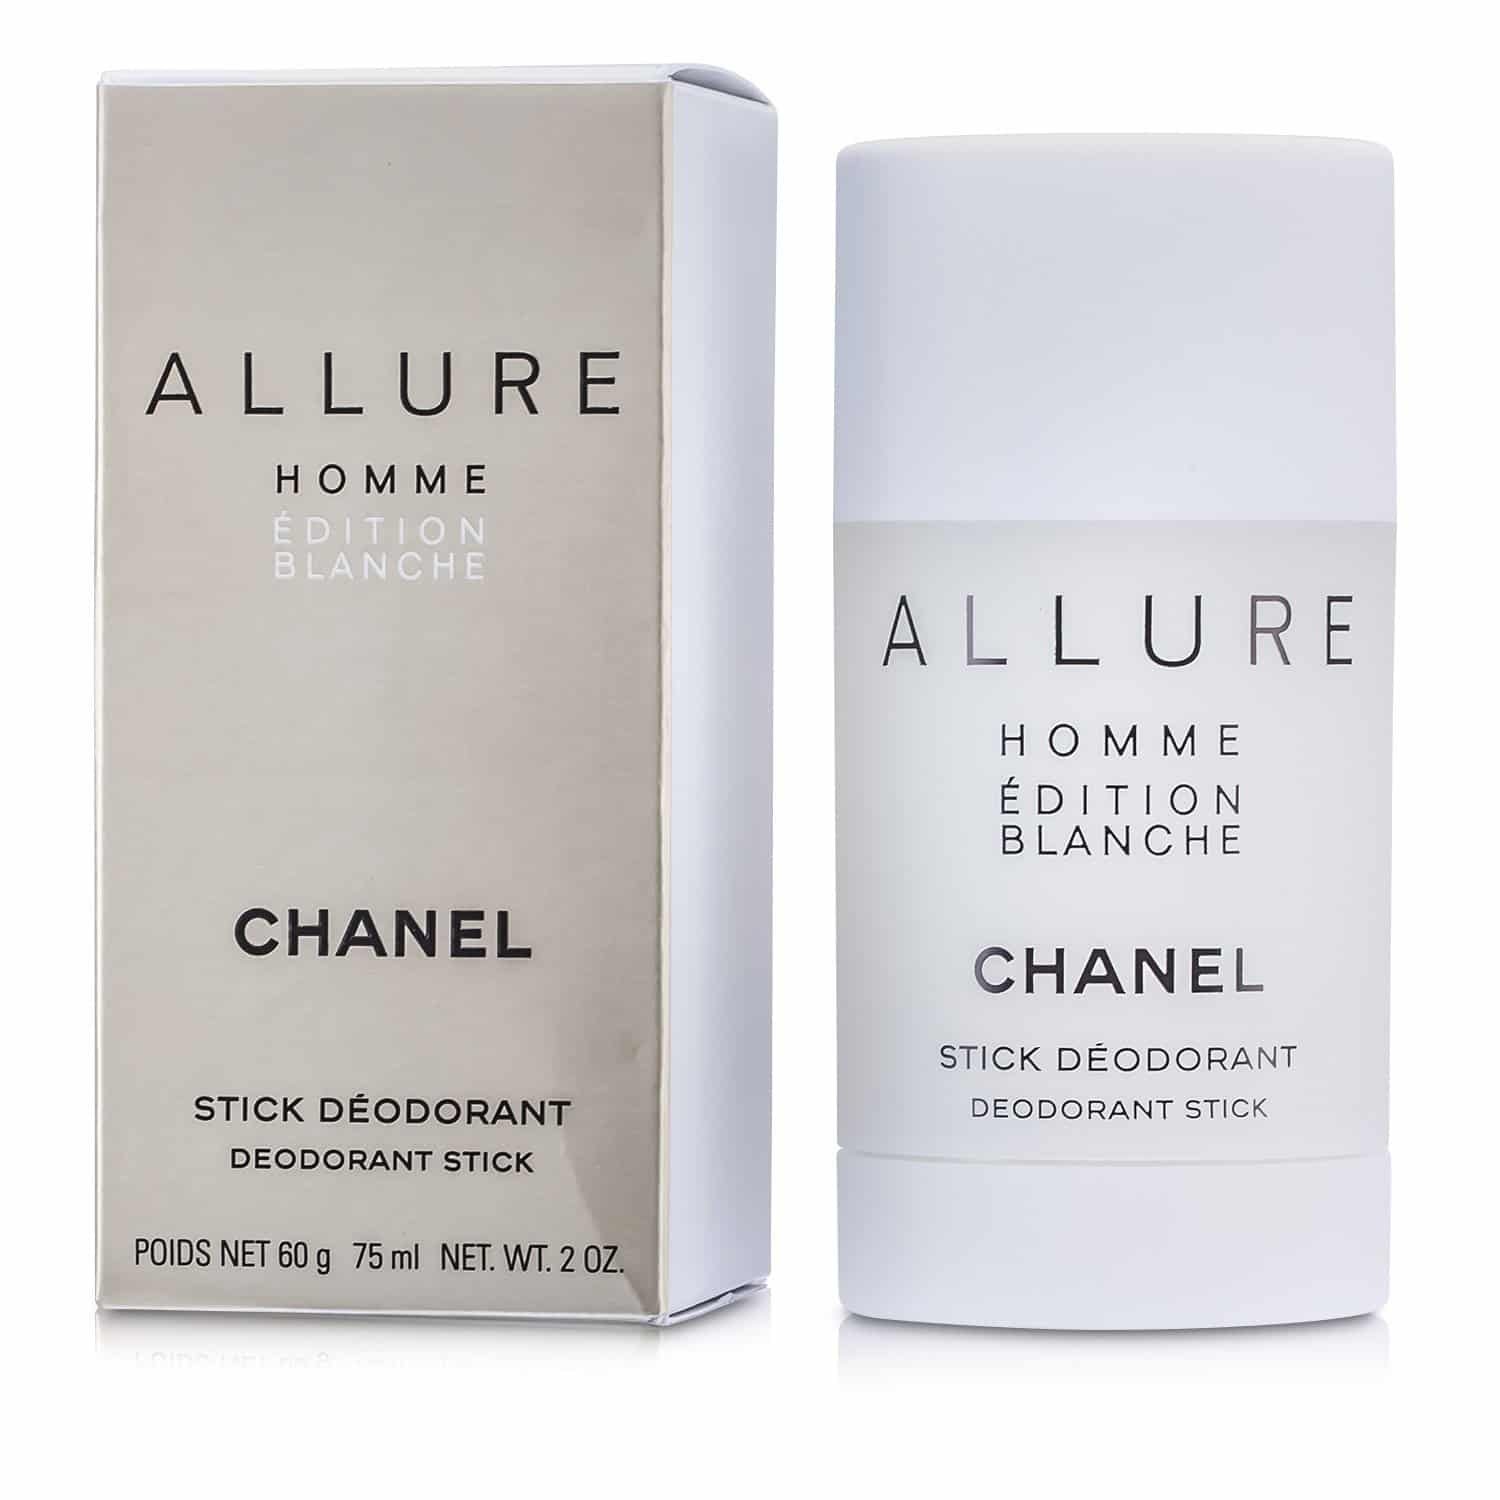 Allure Homme Edition Blanche Eau De Parfum Spray from Chanel to